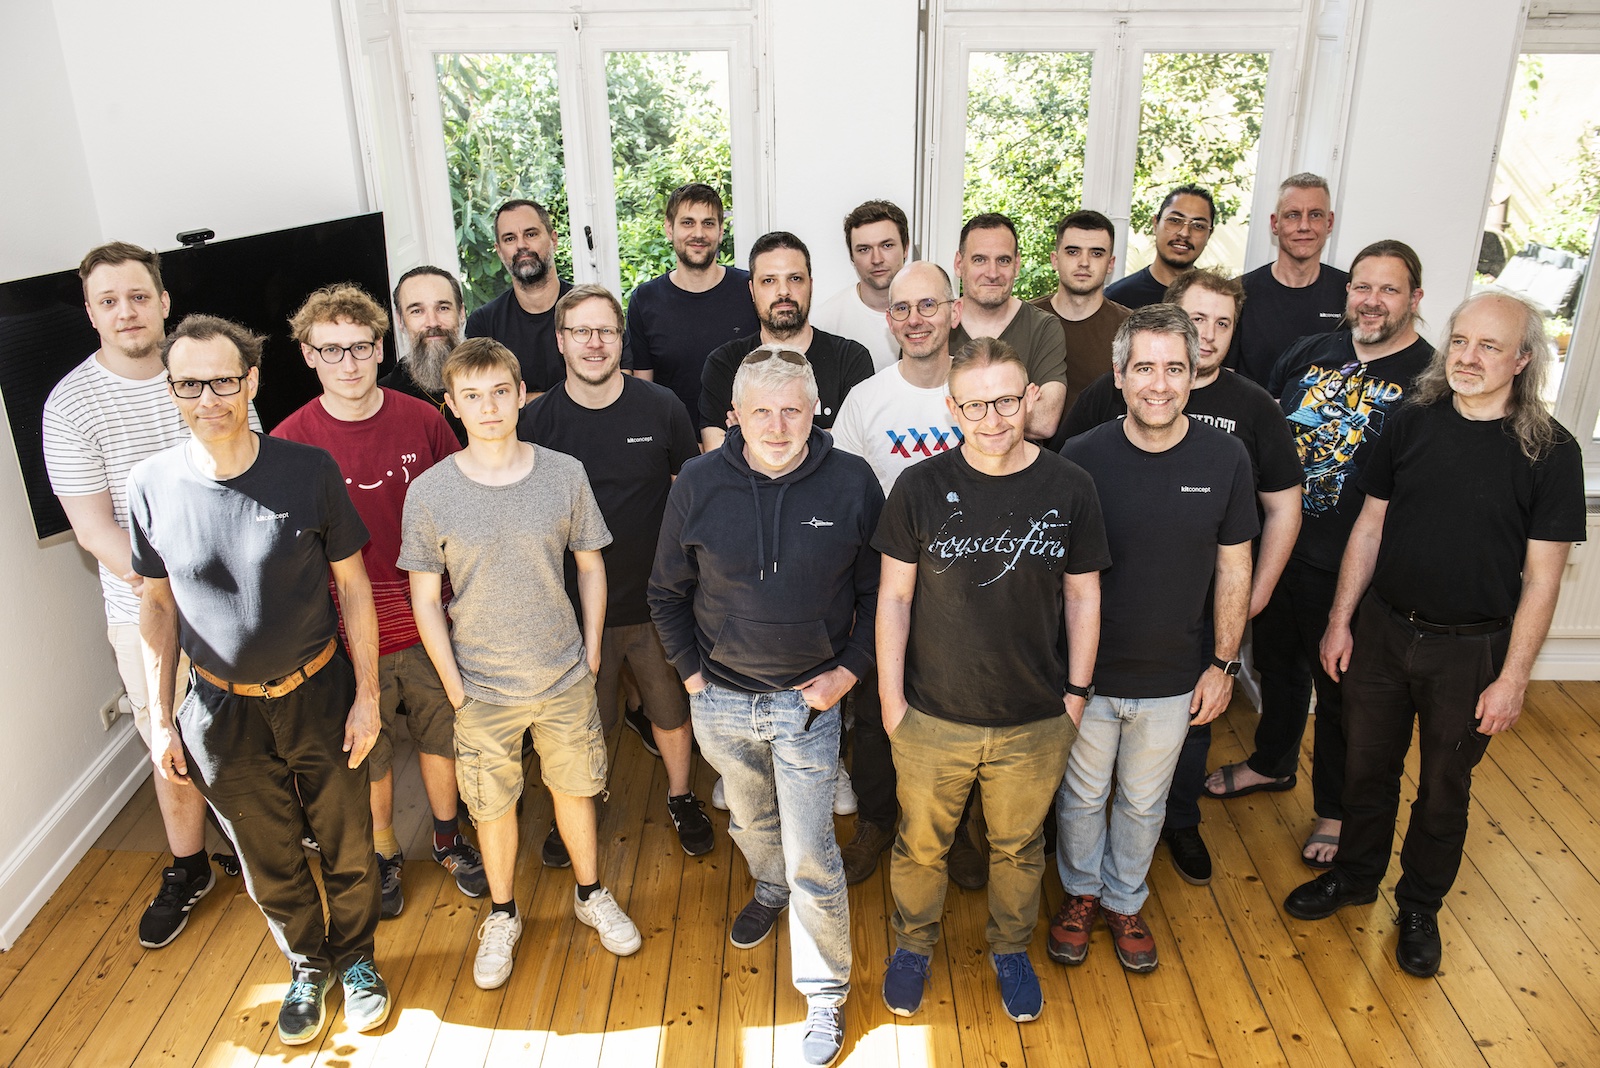 Group Picture of beethoven Sprint attendees